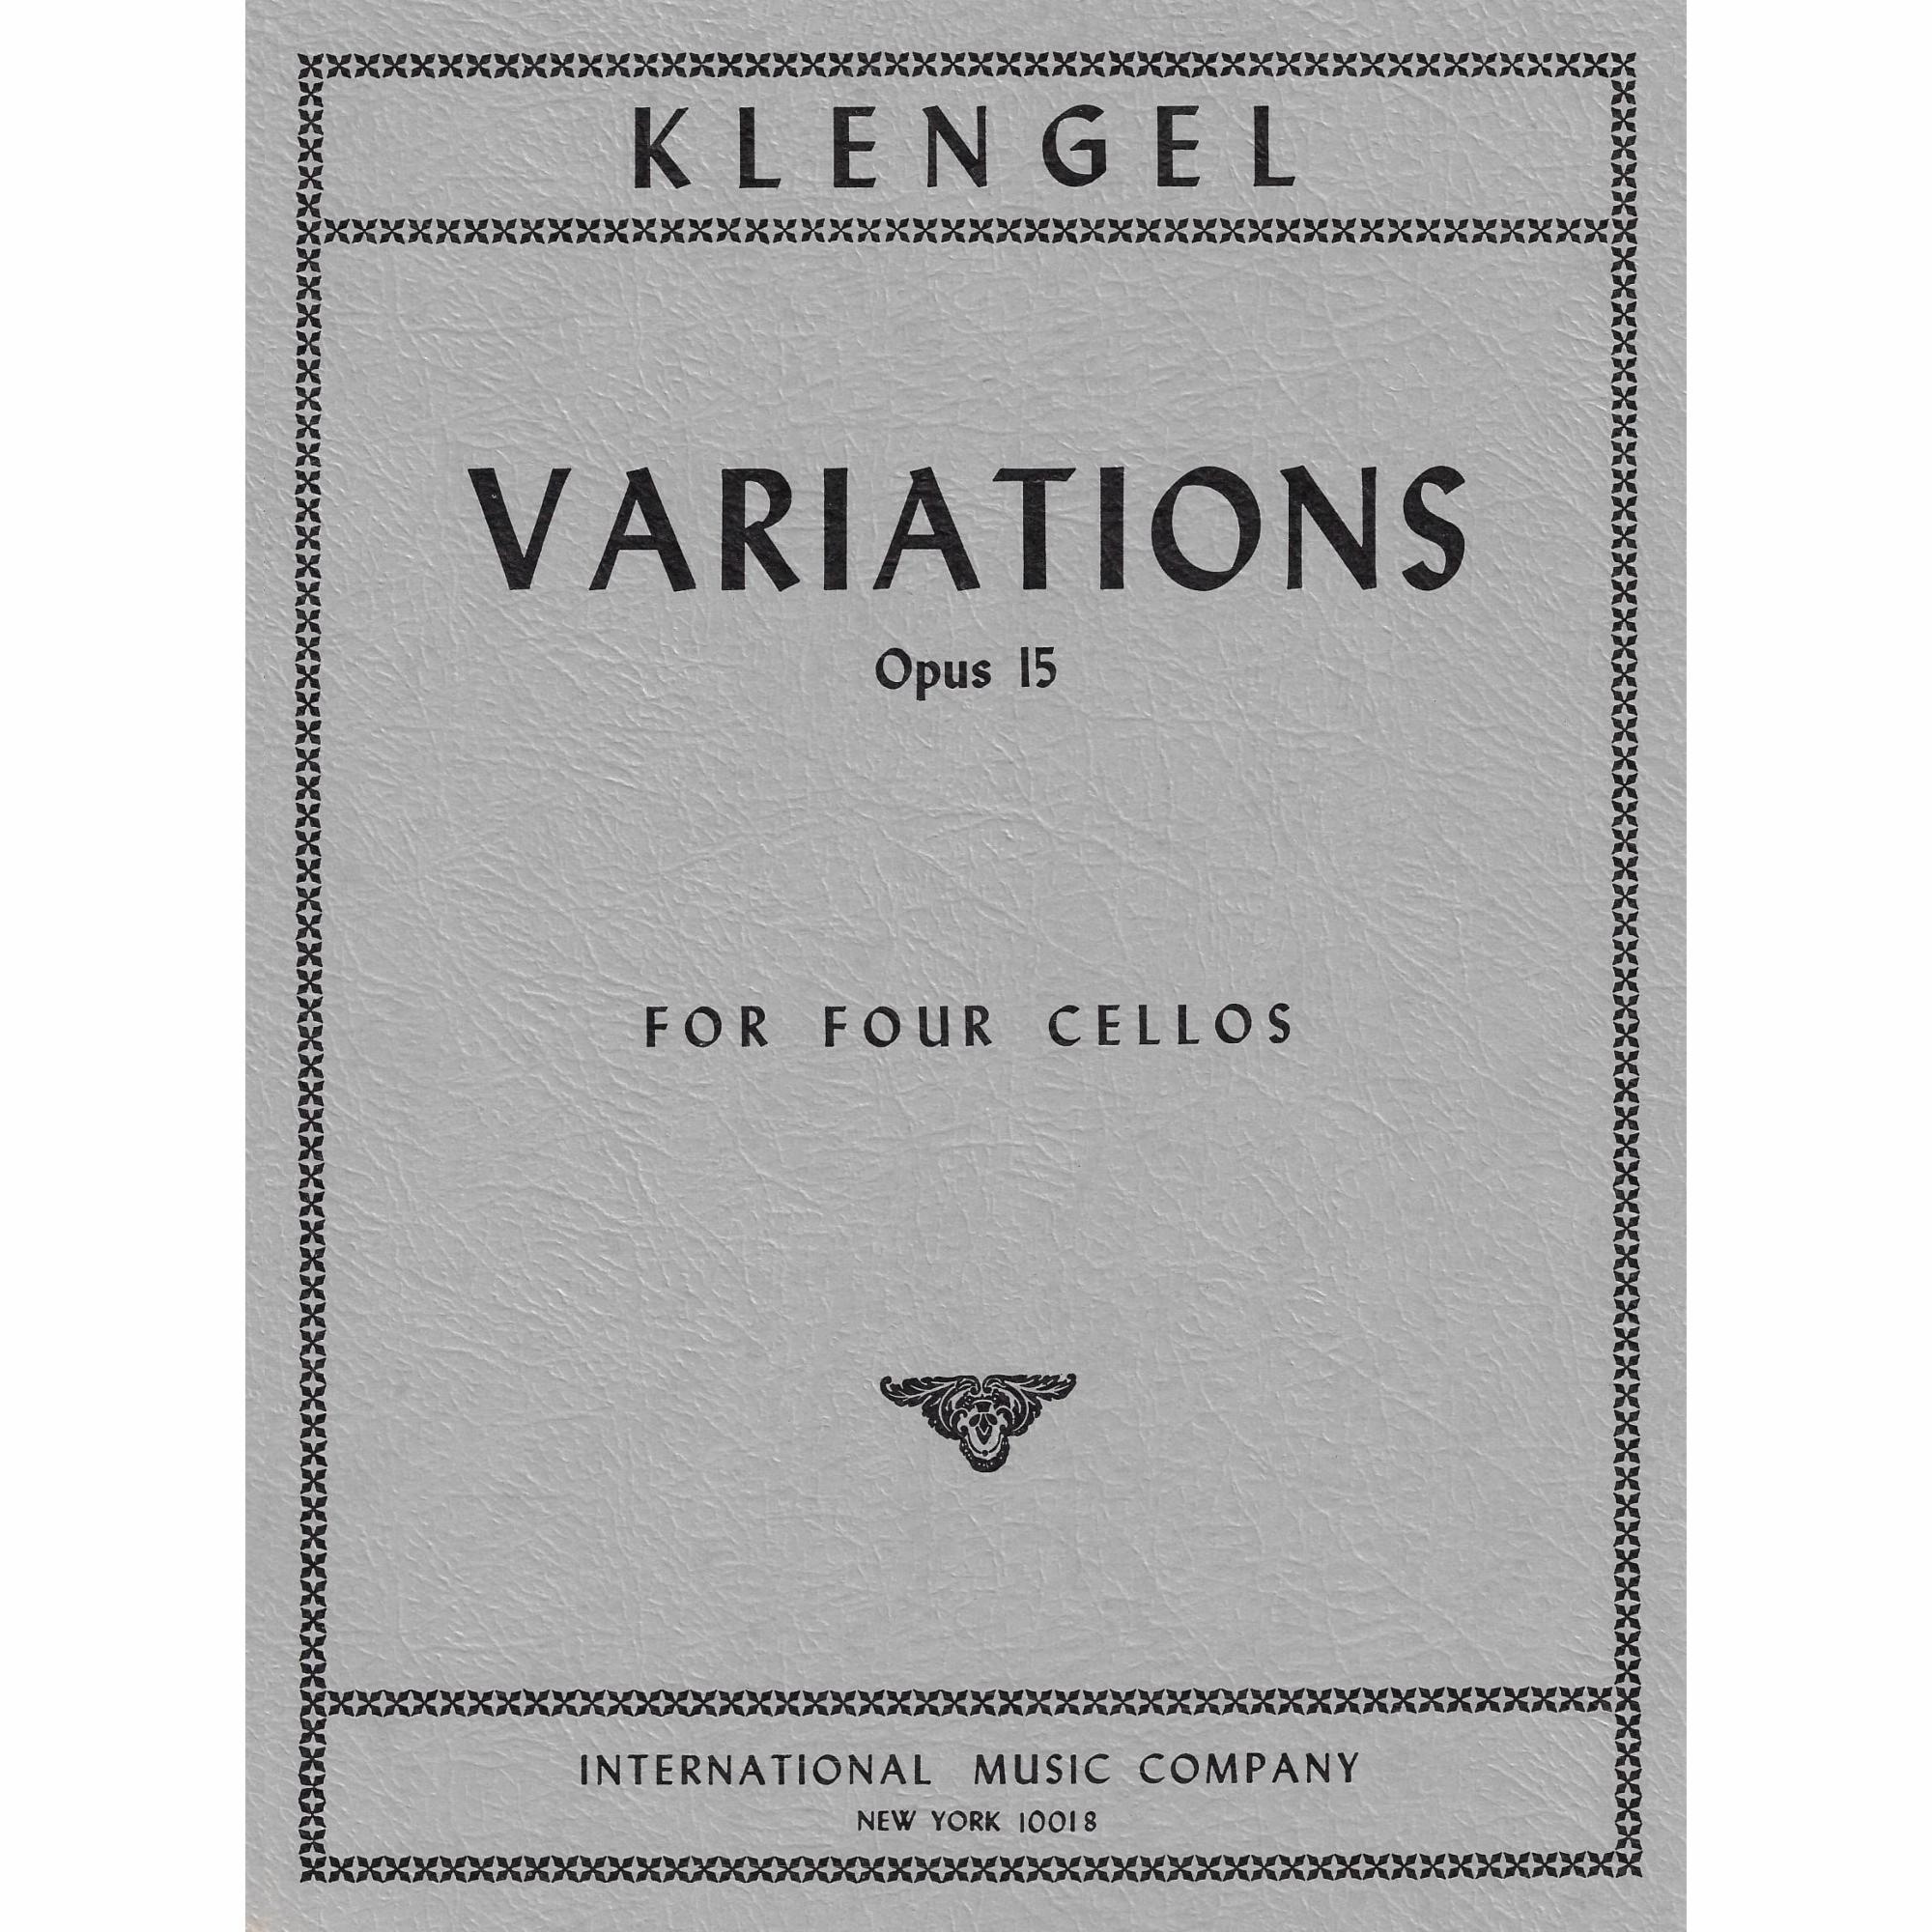 Klengel -- Variations, Op. 15 for Four Cellos